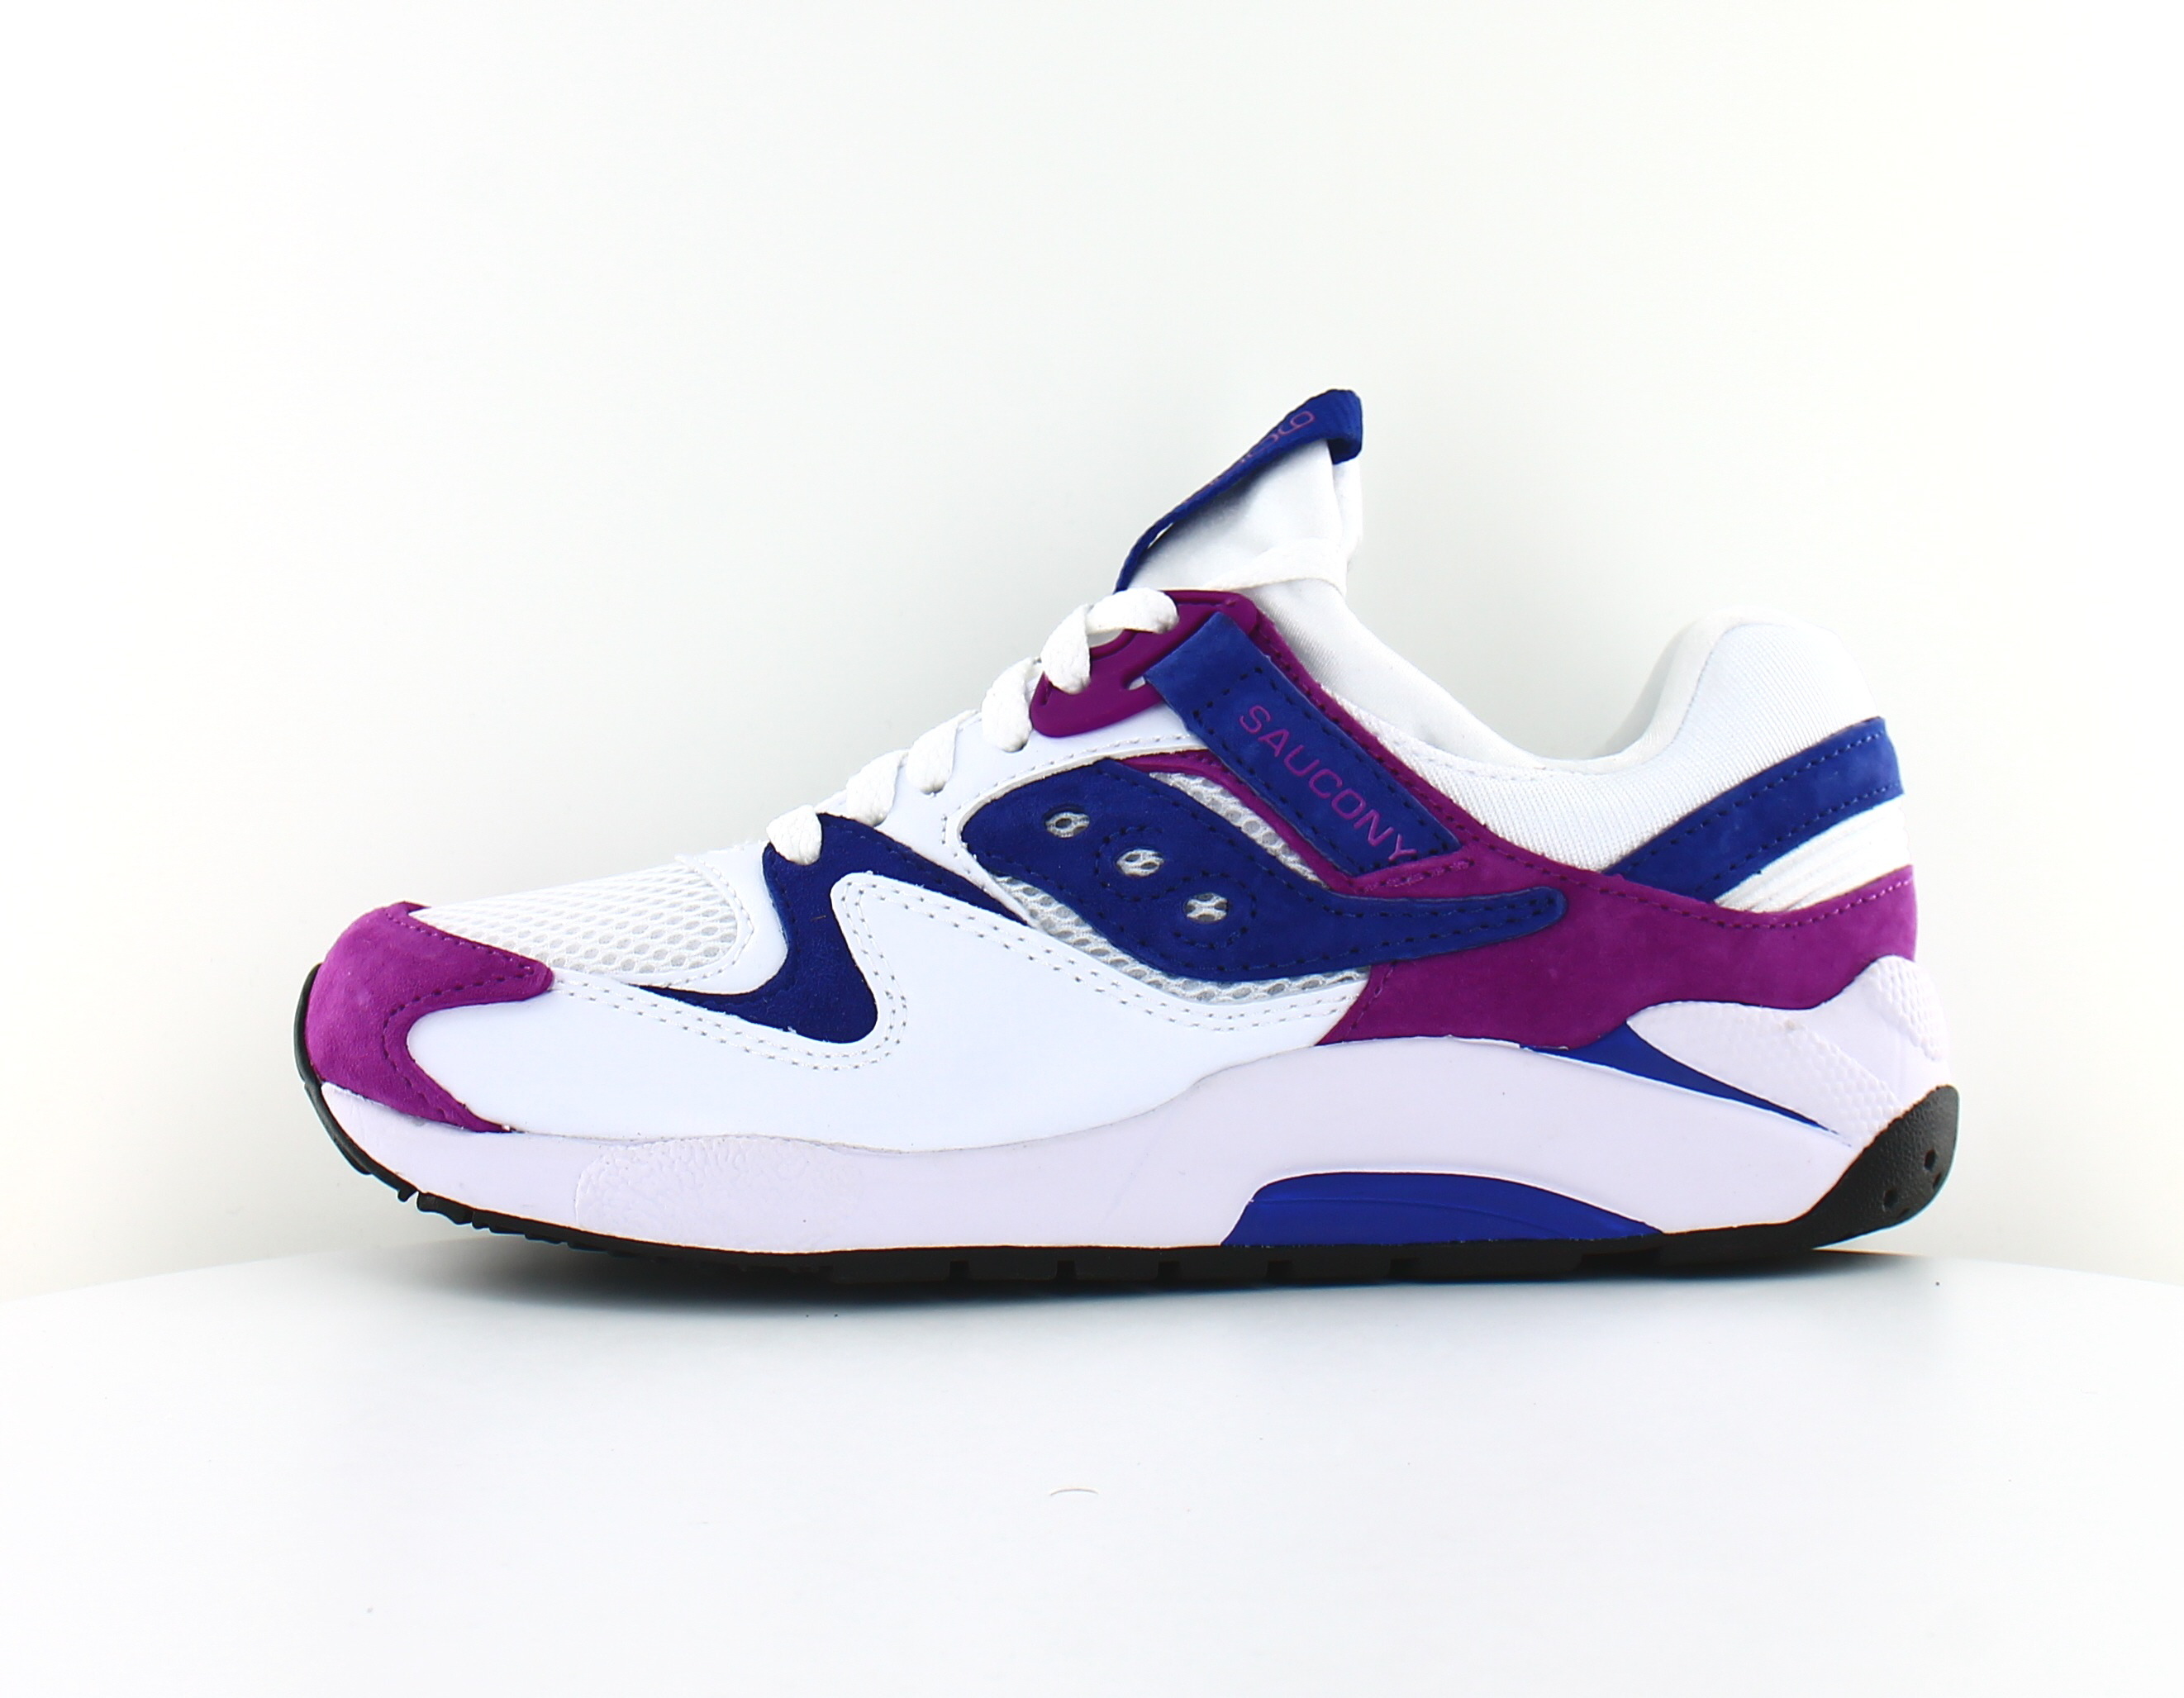 saucony grid 9000 chaussure